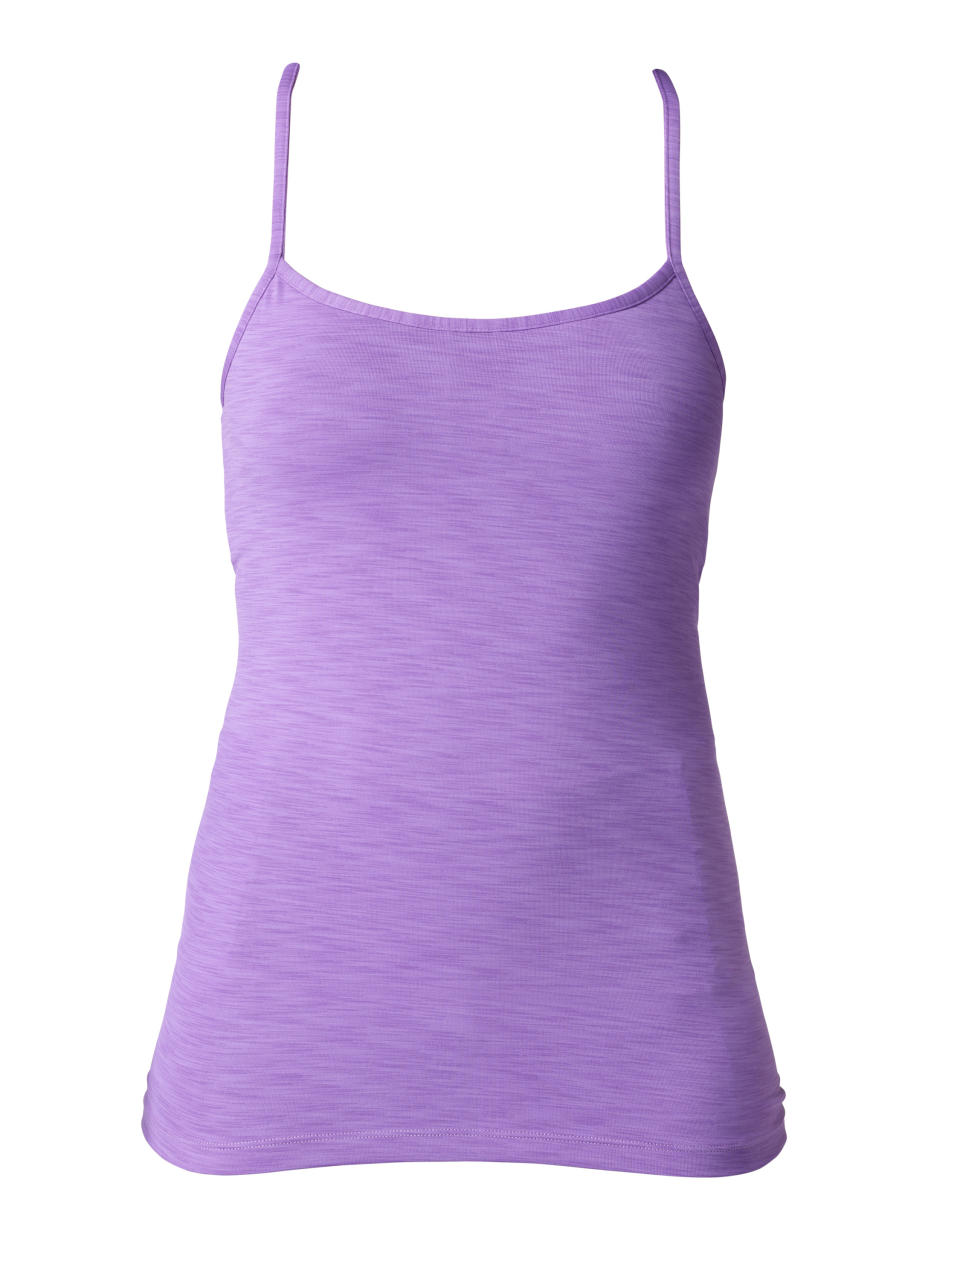 This product image released by Roxy Outdoor Fitness shows a ladies double duty tank top made of a polyeste/spandex jersey blend with a built-in shelf bra in orchid. Participation in mud runs and obstacle courses, such as the Warrior Dash or Tough Mudder, is growing by leaps and bounds. The right clothes and gear could be the difference in performance and comfort. (AP Photo/Roxy Outdoor Fitness)